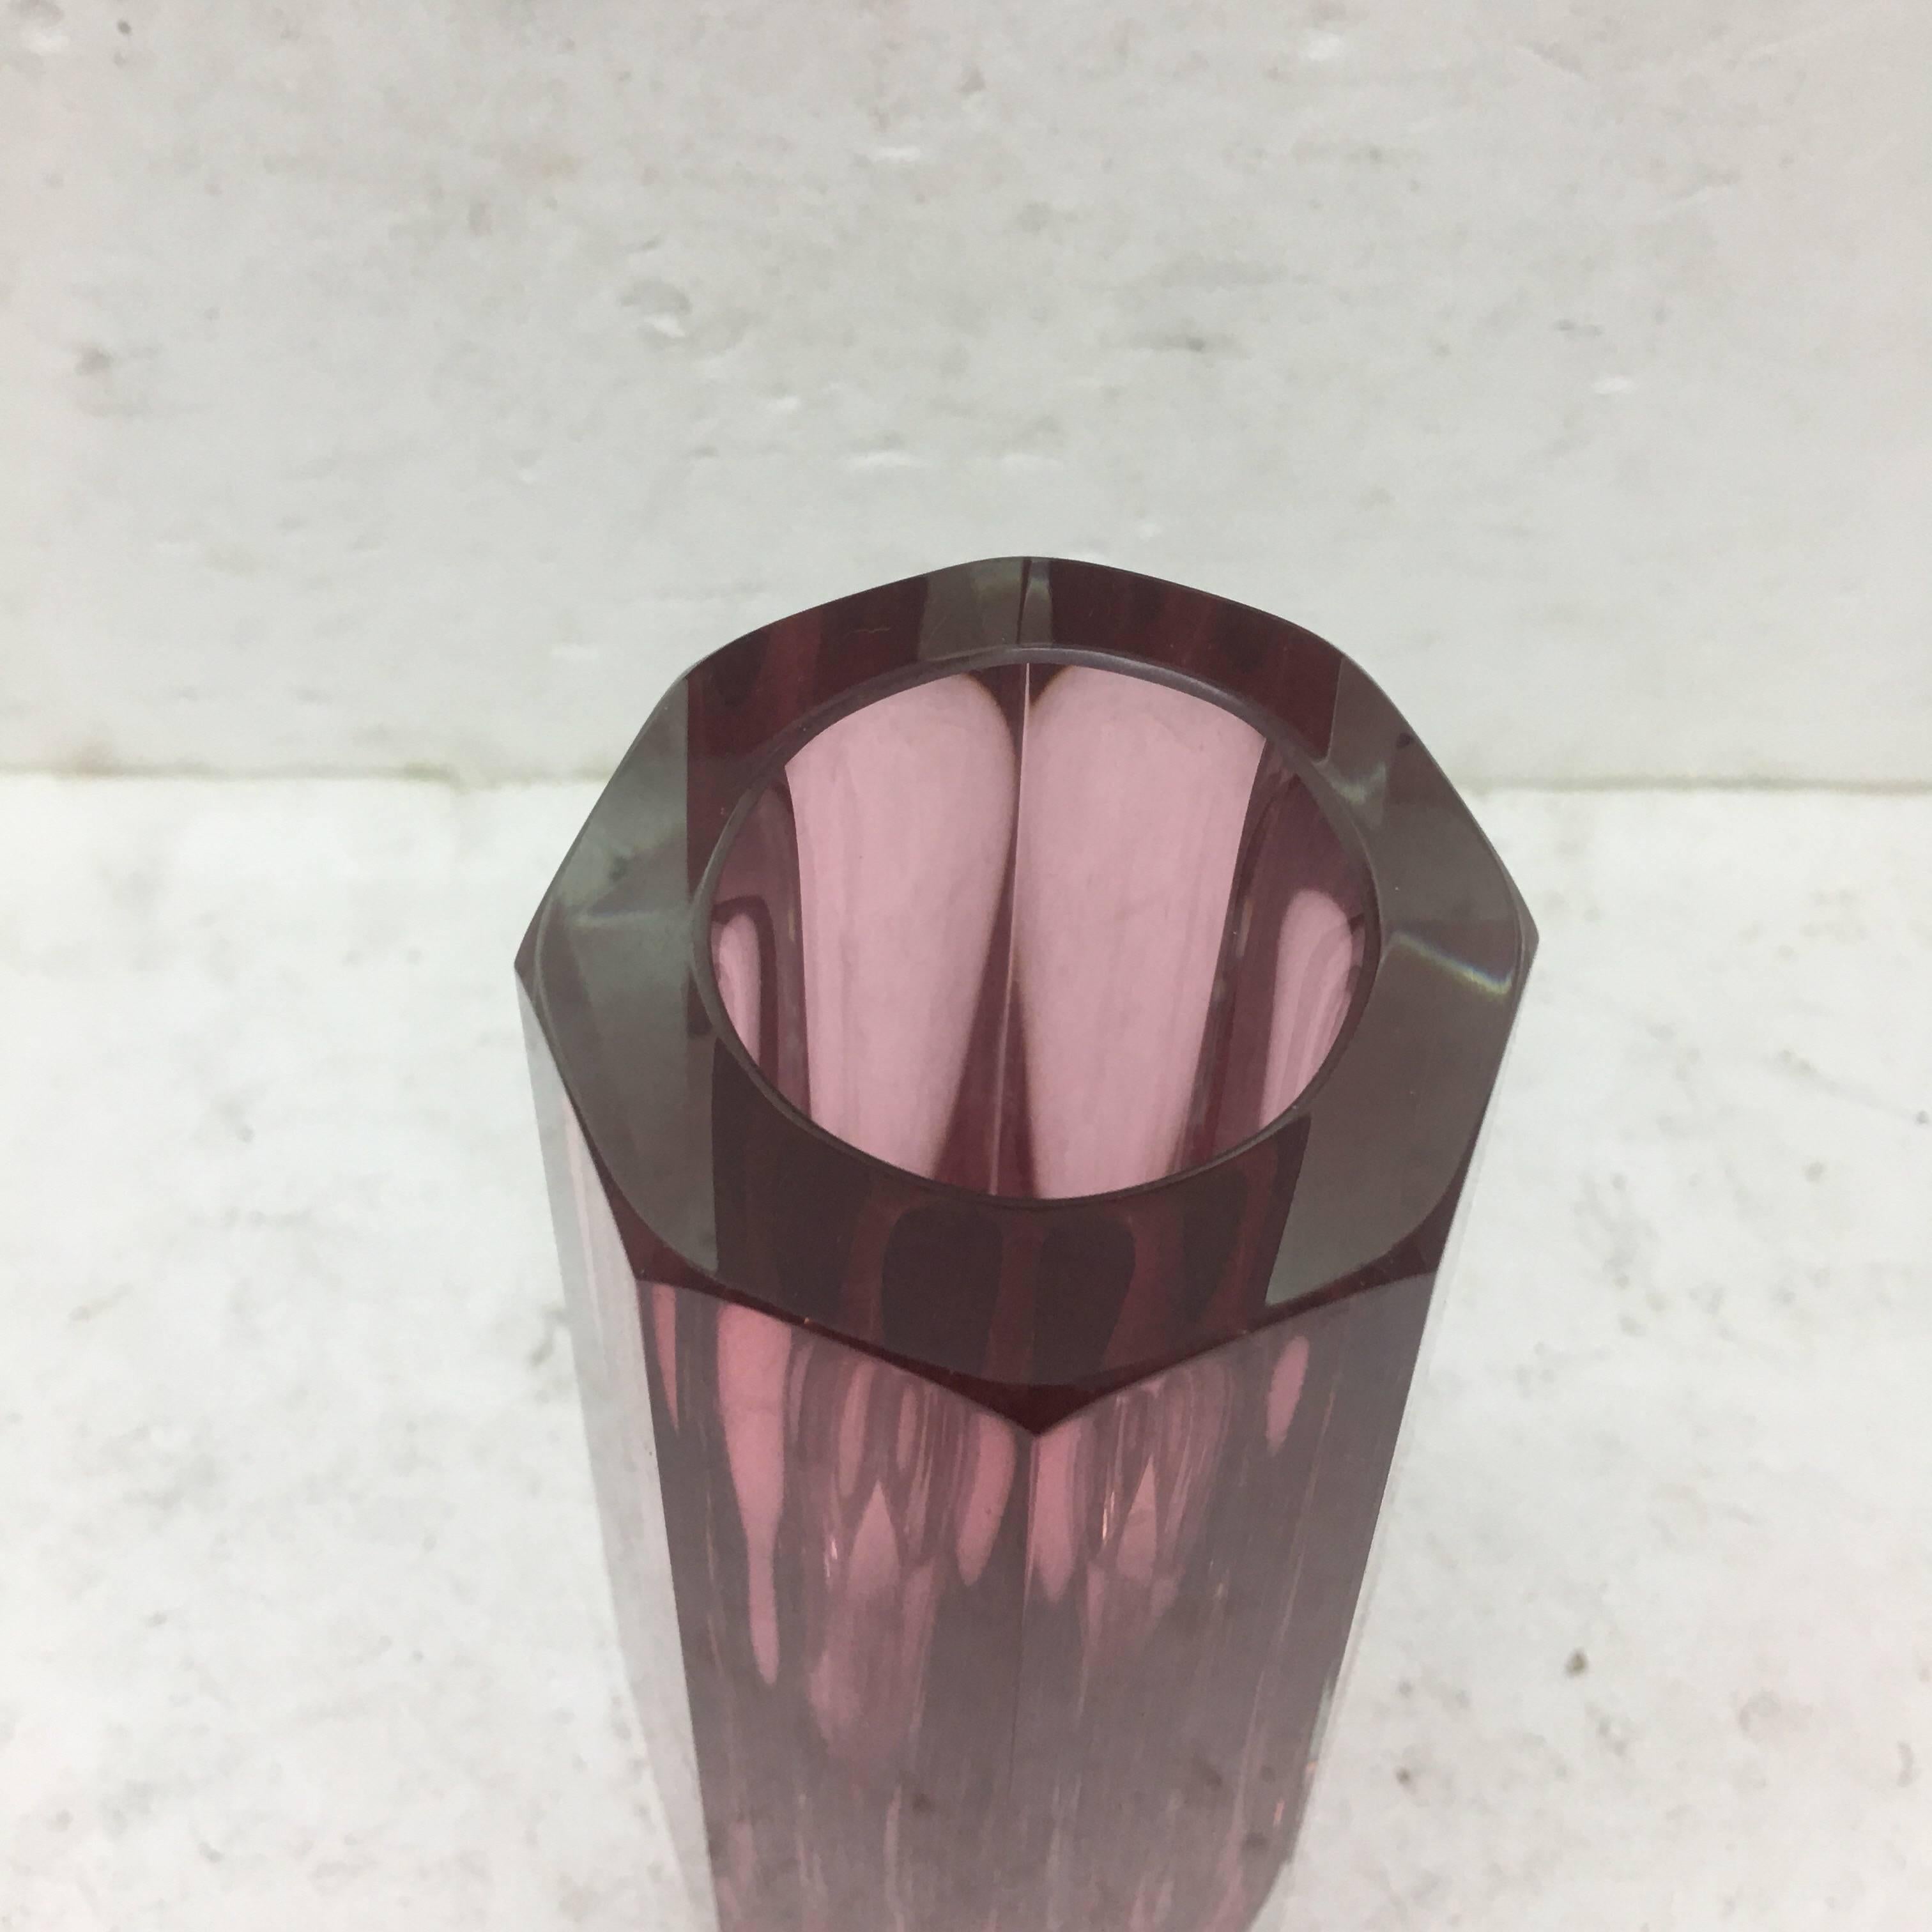 Particular pink vase by Mandruzzato made in Italy, circa 1970.